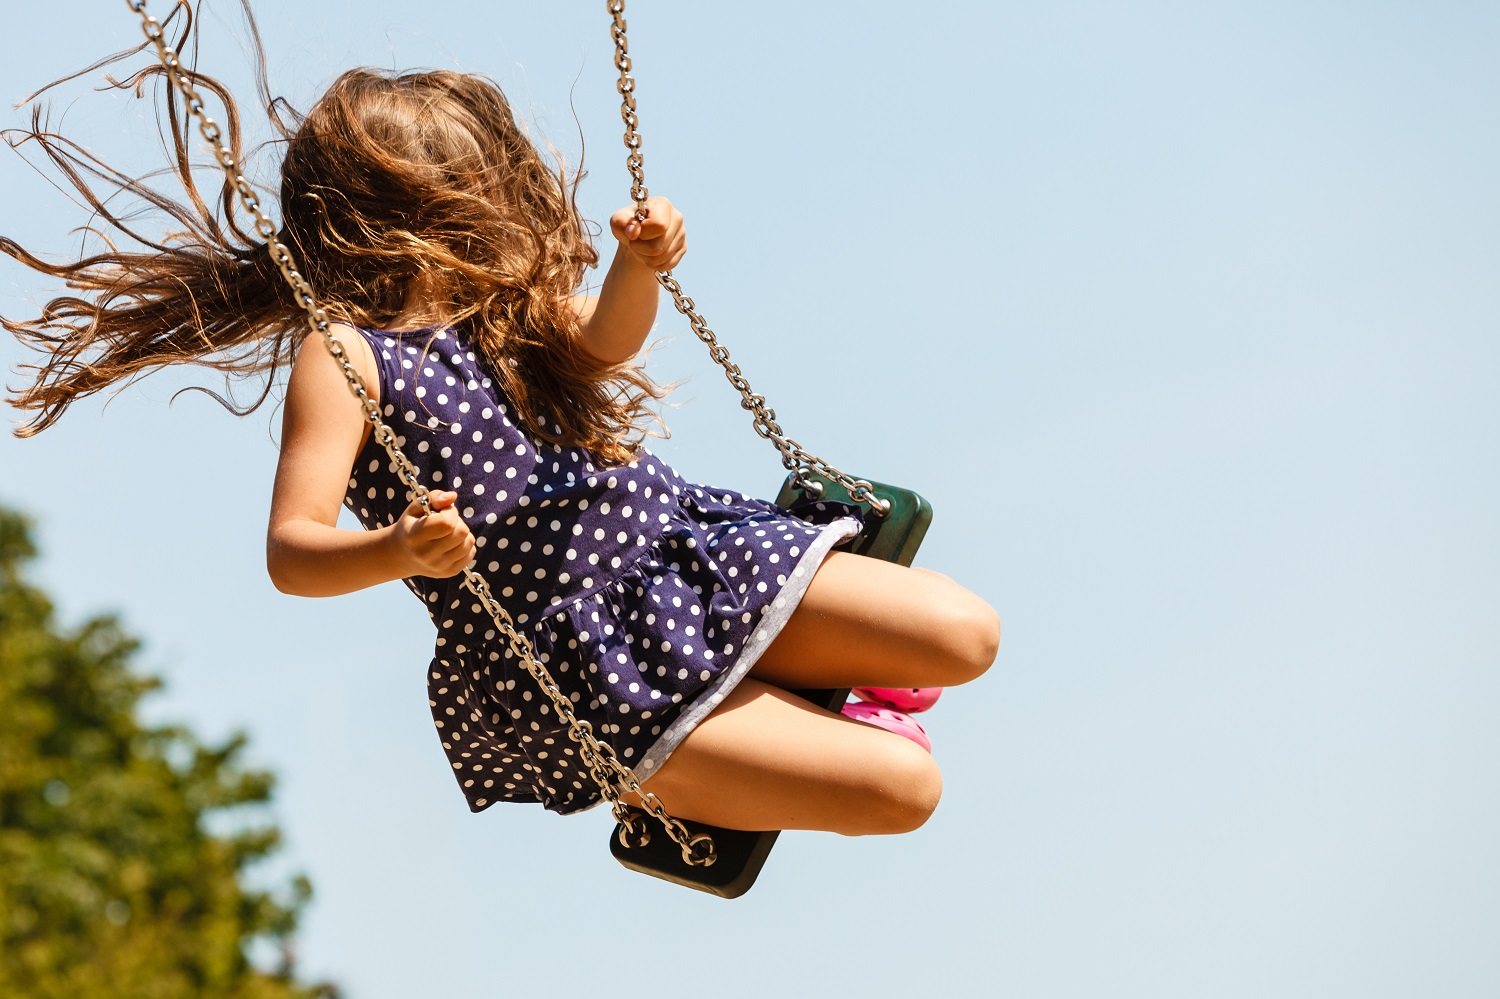 a young girl on a swing